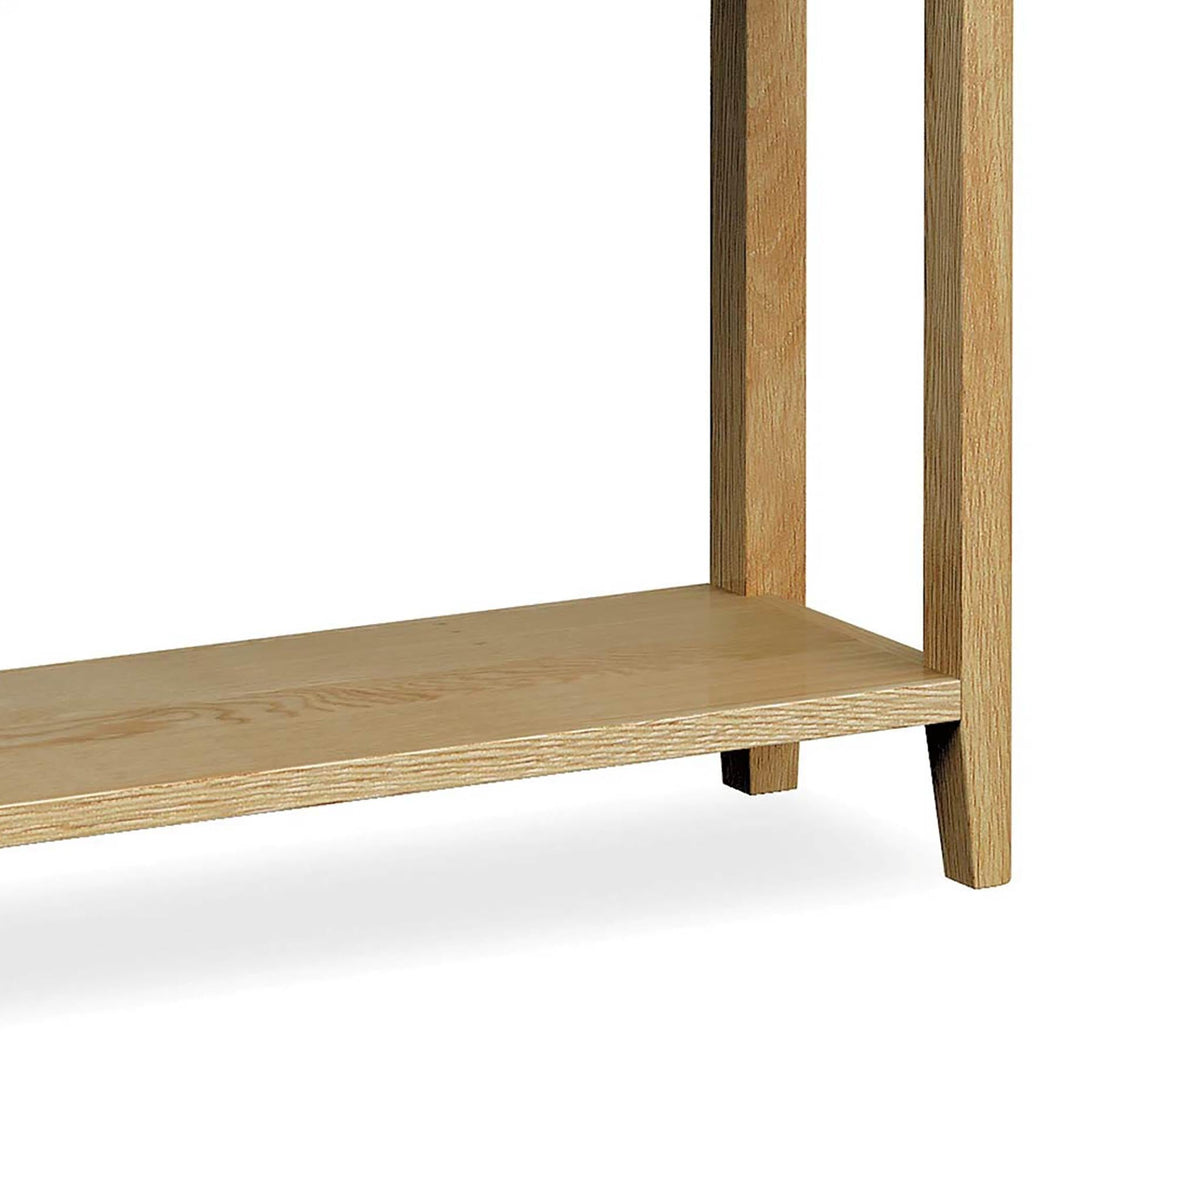 Alba Oak Console Table - Close up of lower shelf and legs